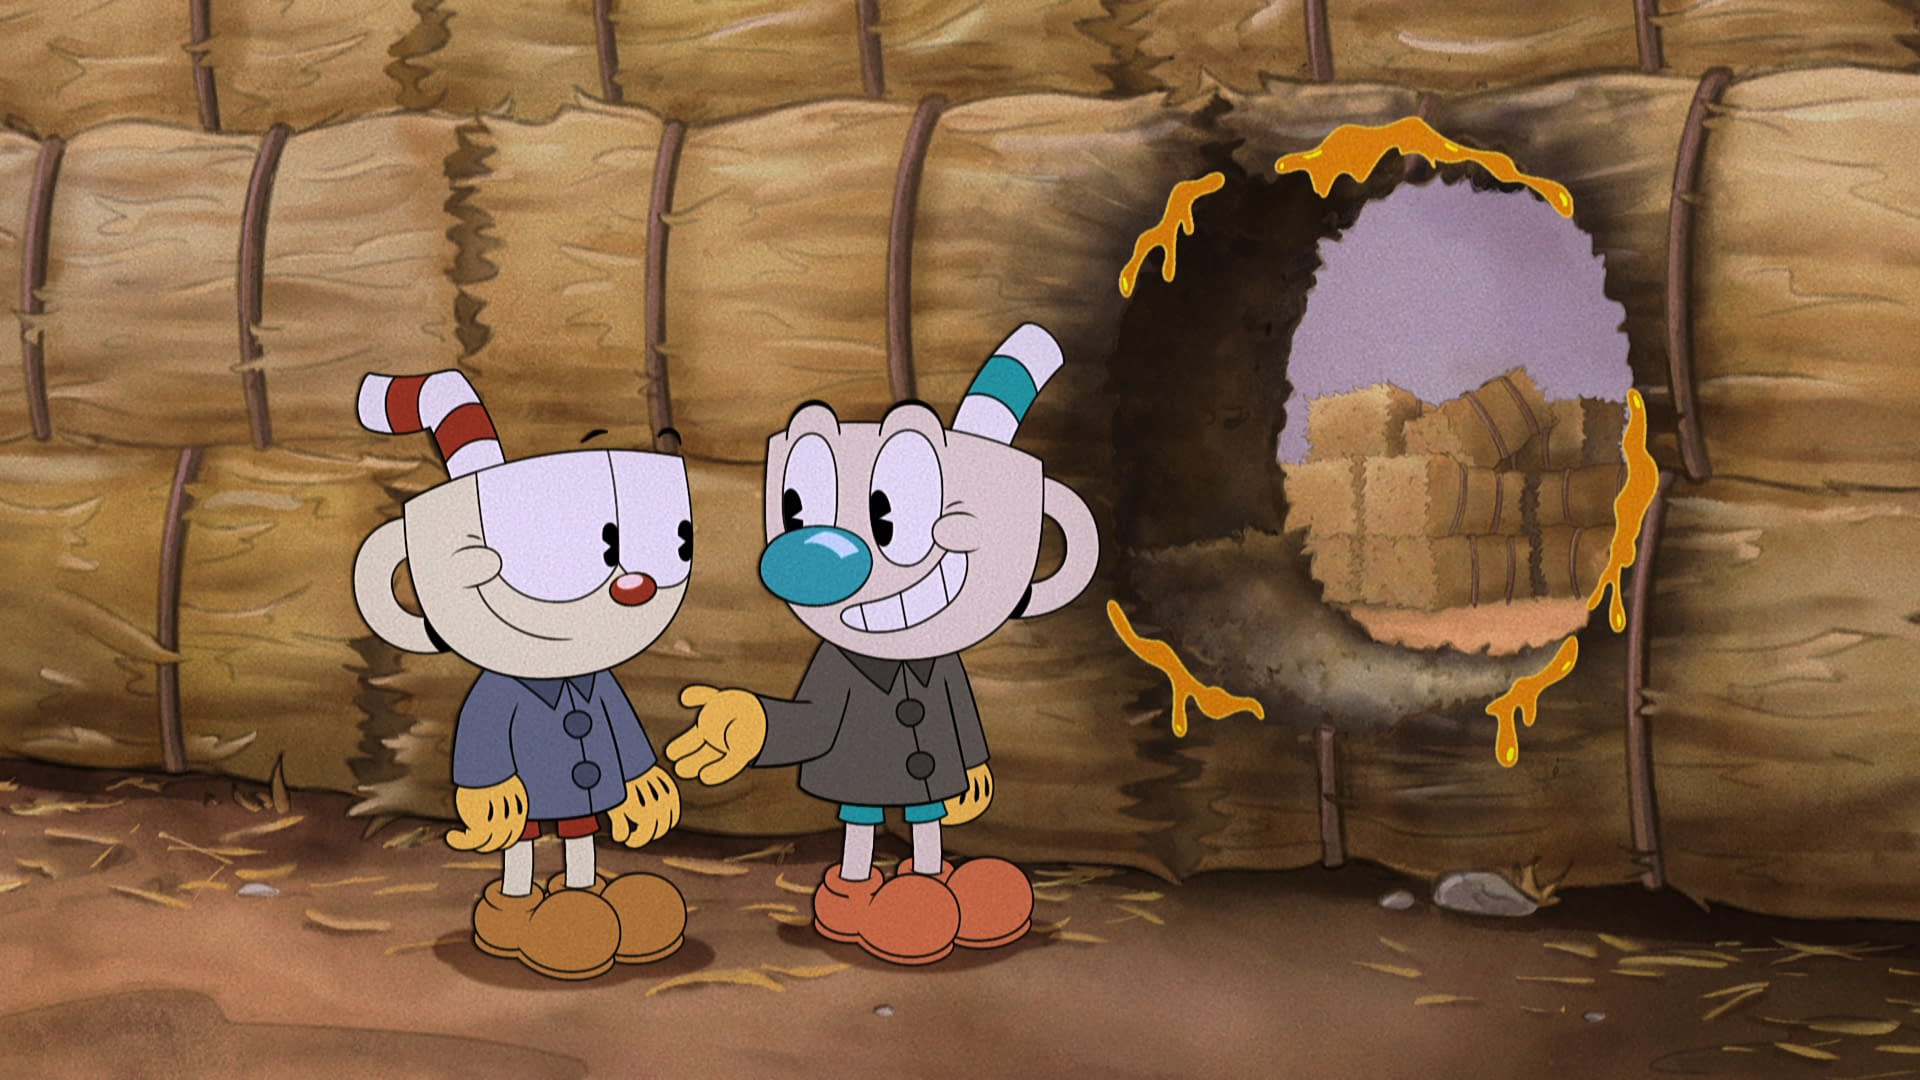 The Cuphead Show Review: A Trip Down Memory Lane